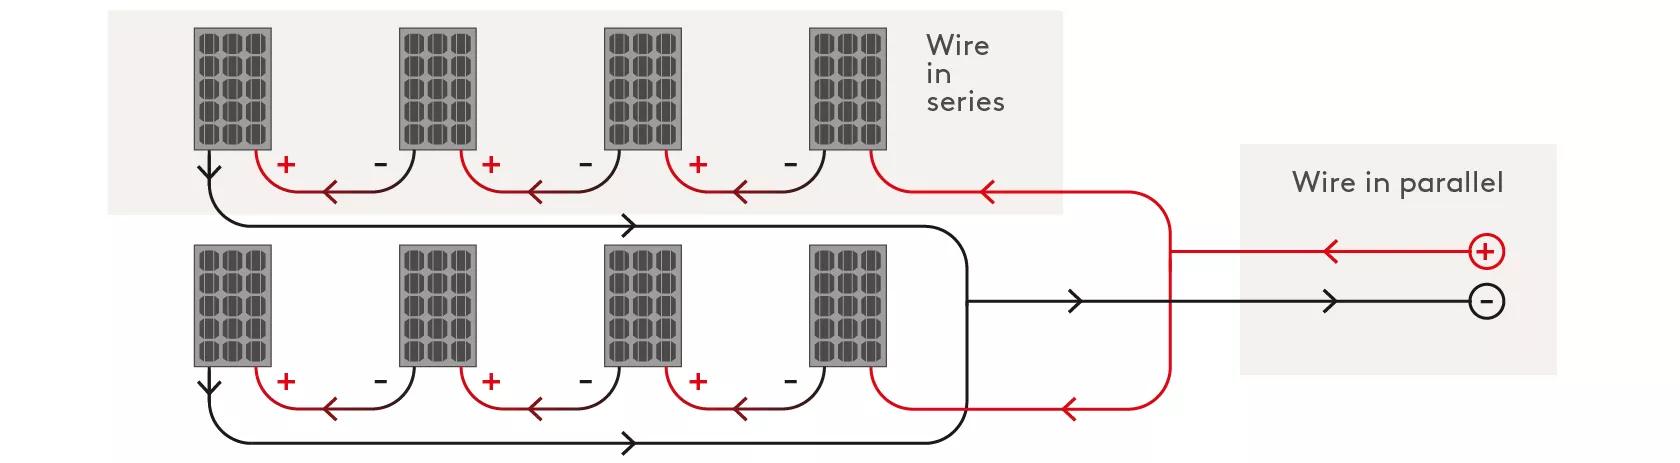 Wiring solar panels in series and parallel diagram